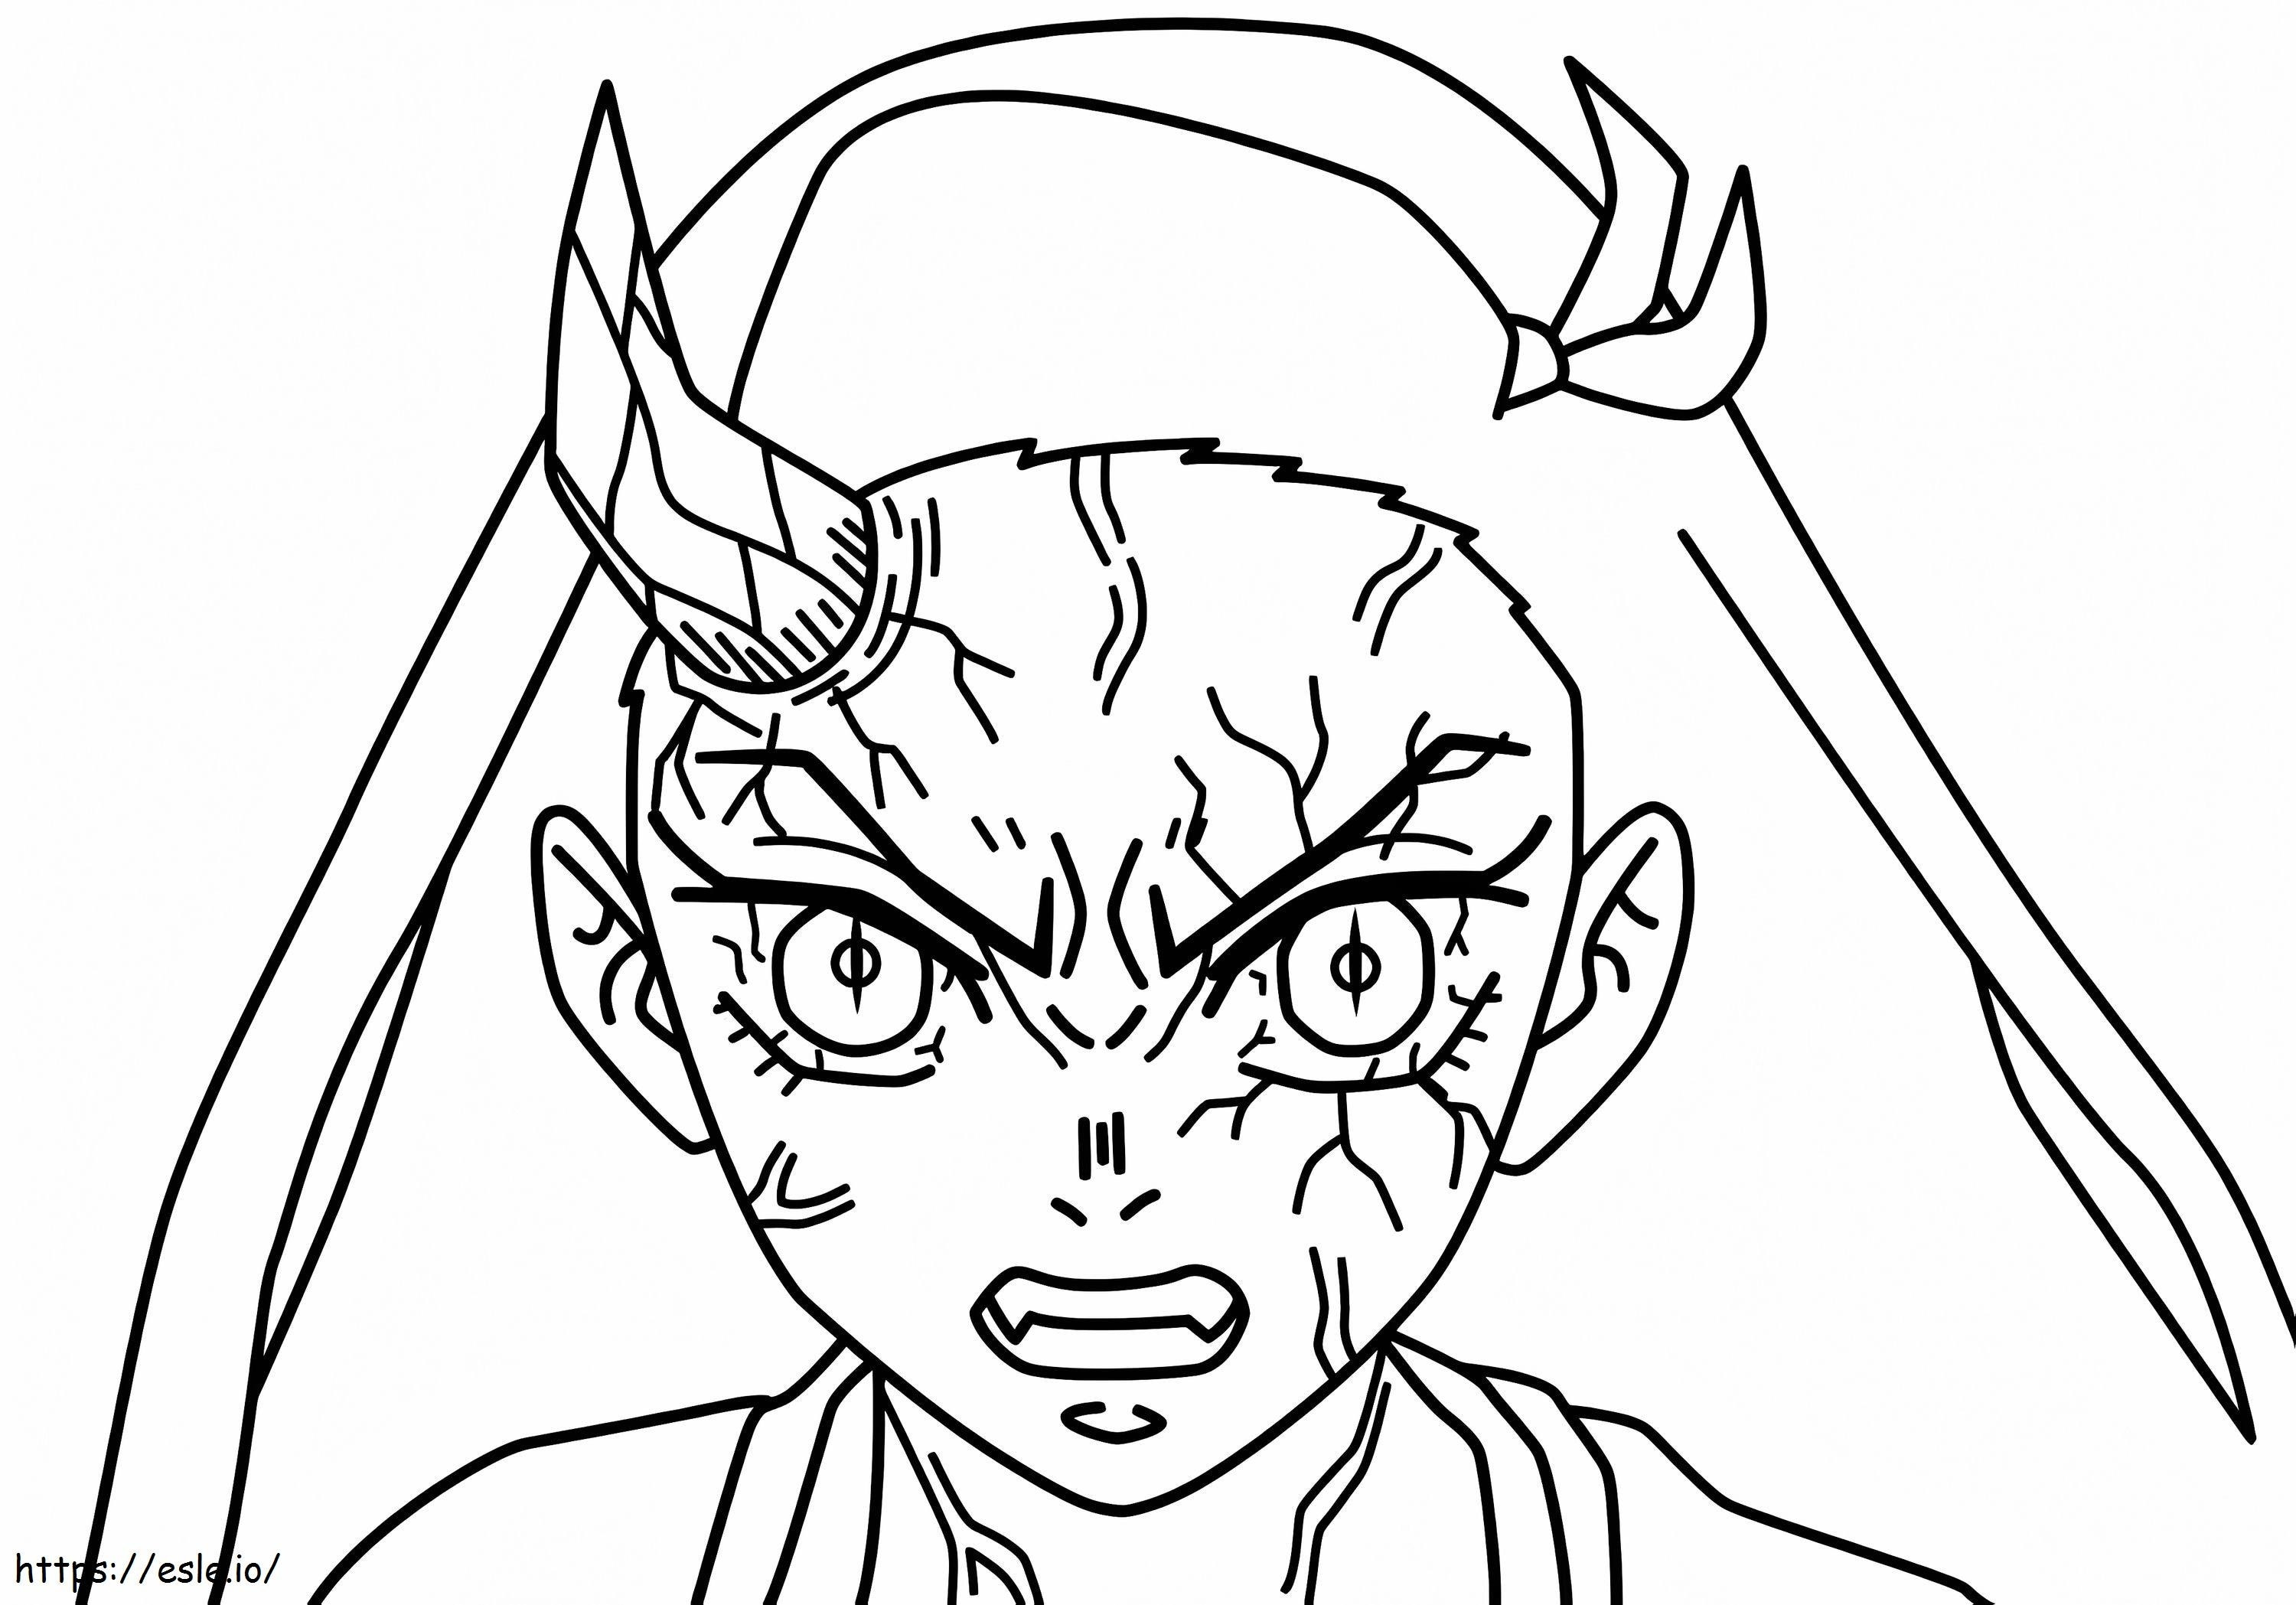 Nezuko With Demon Form coloring page